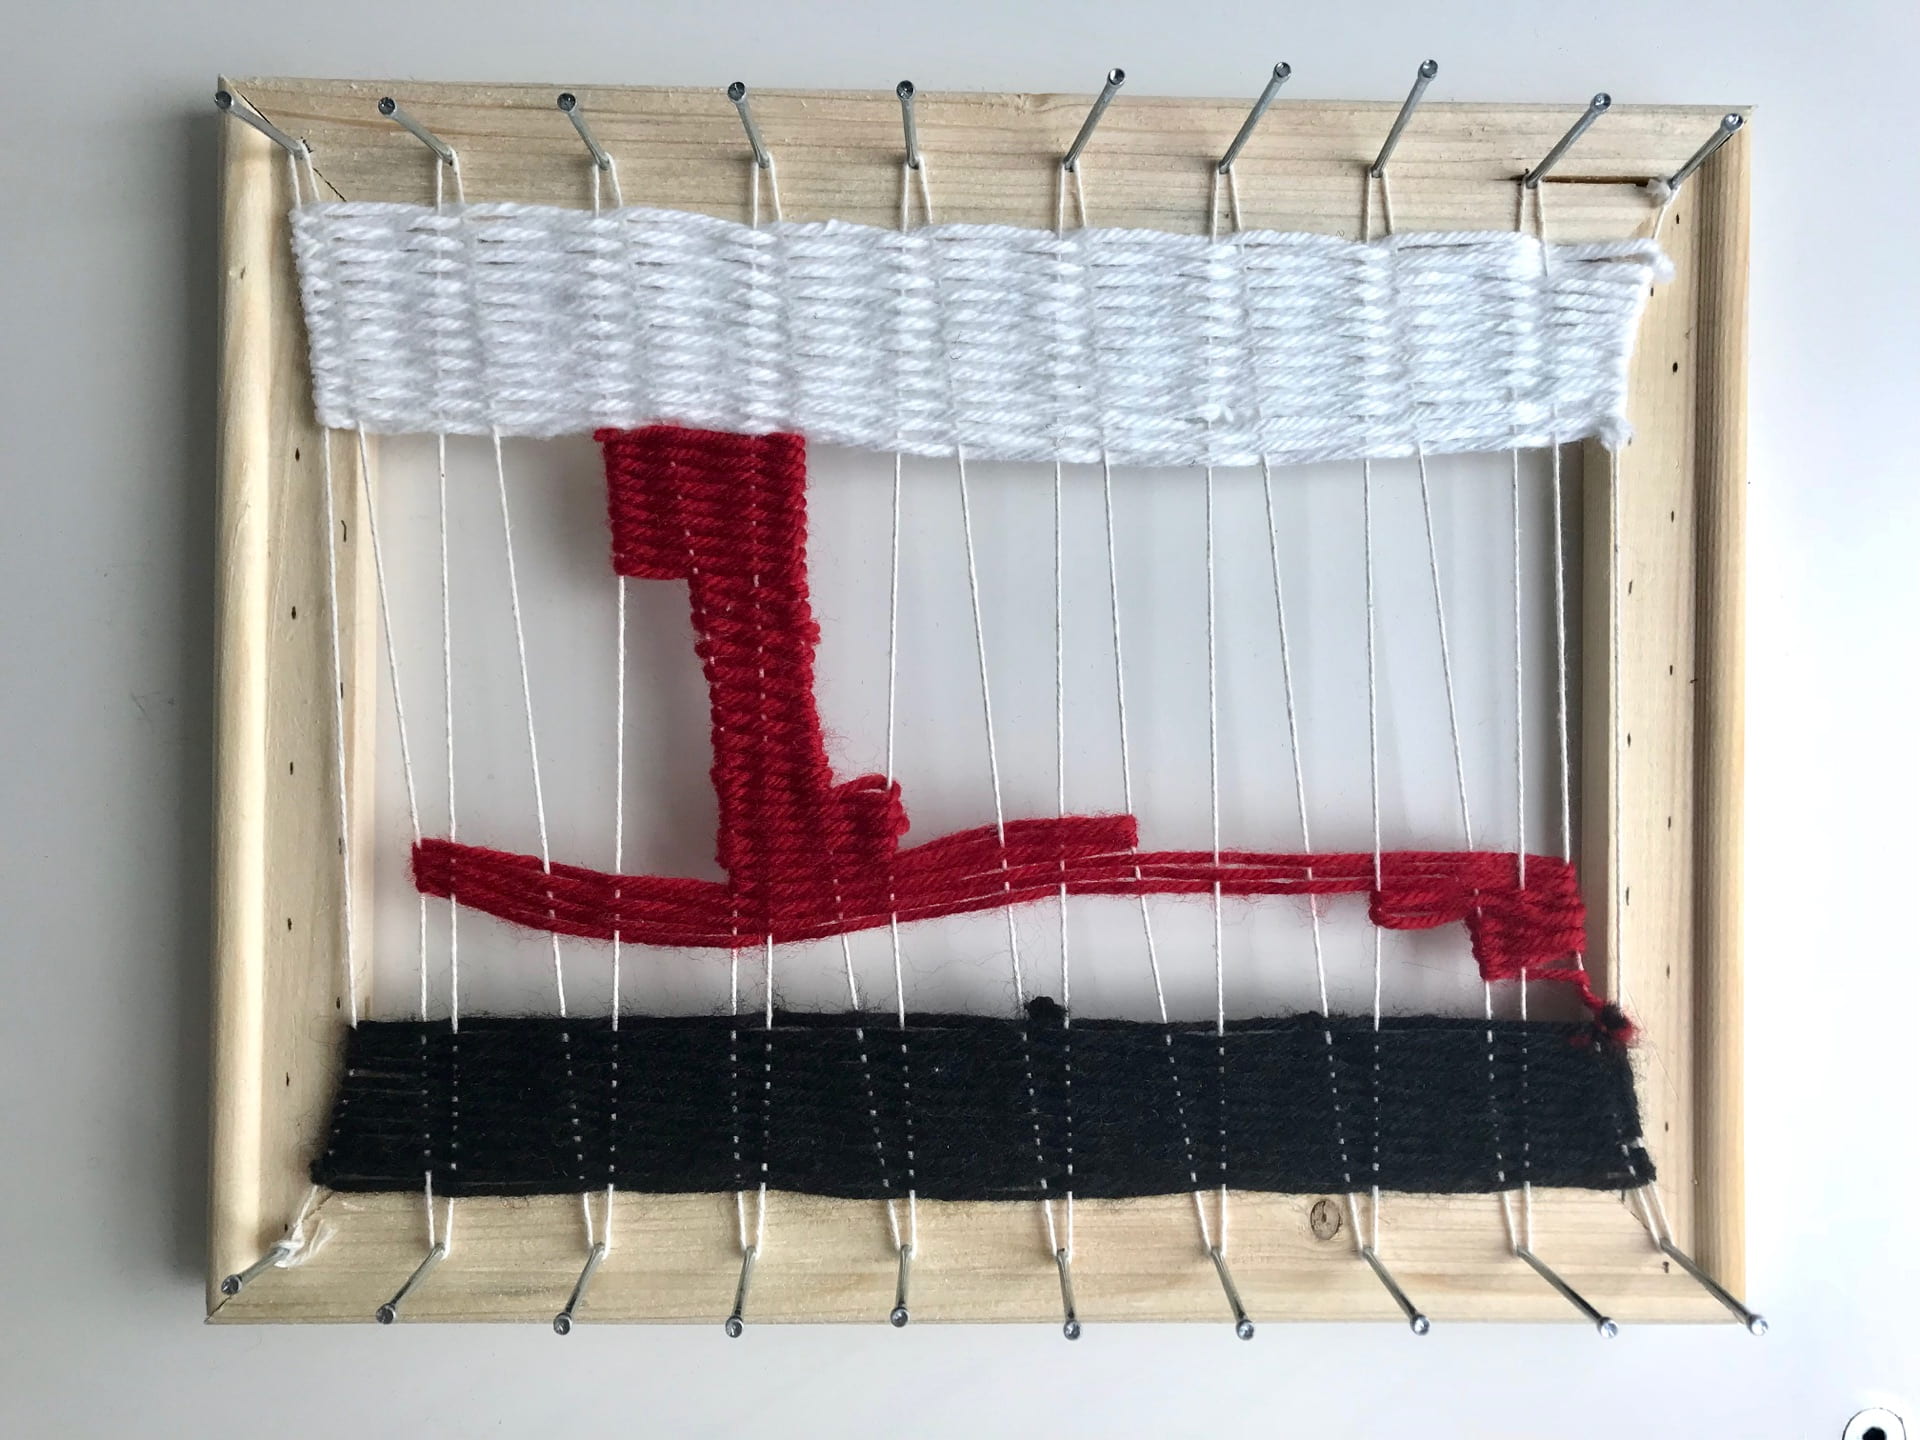 Bridge 1 Project: Building a Loom and Weaving a Poem